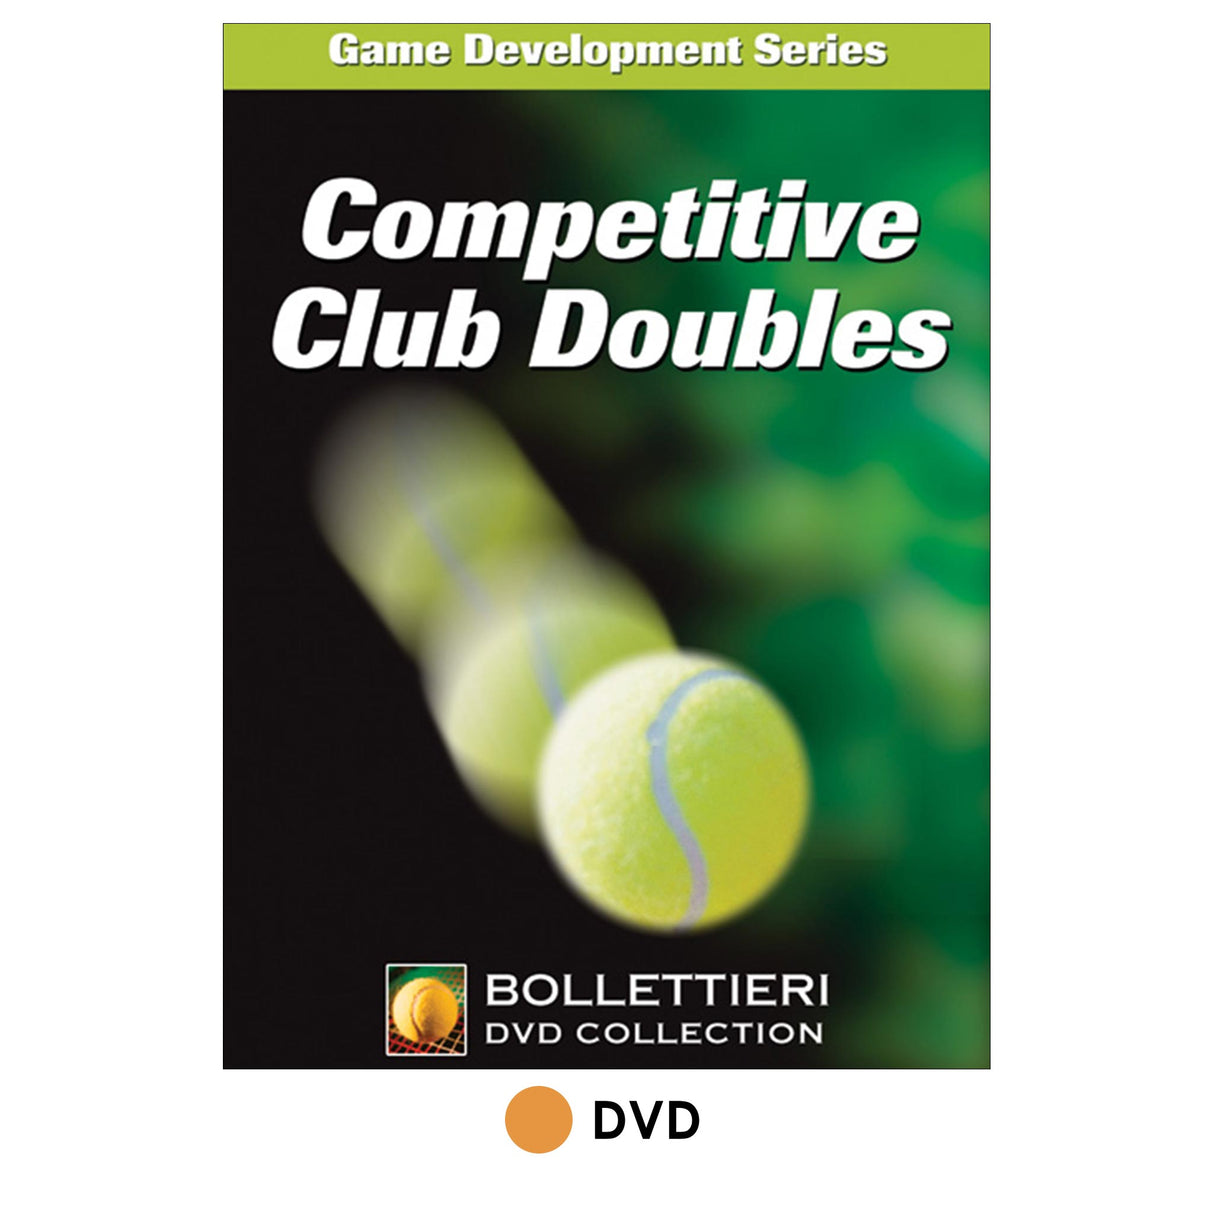 Competitive Club Doubles DVD